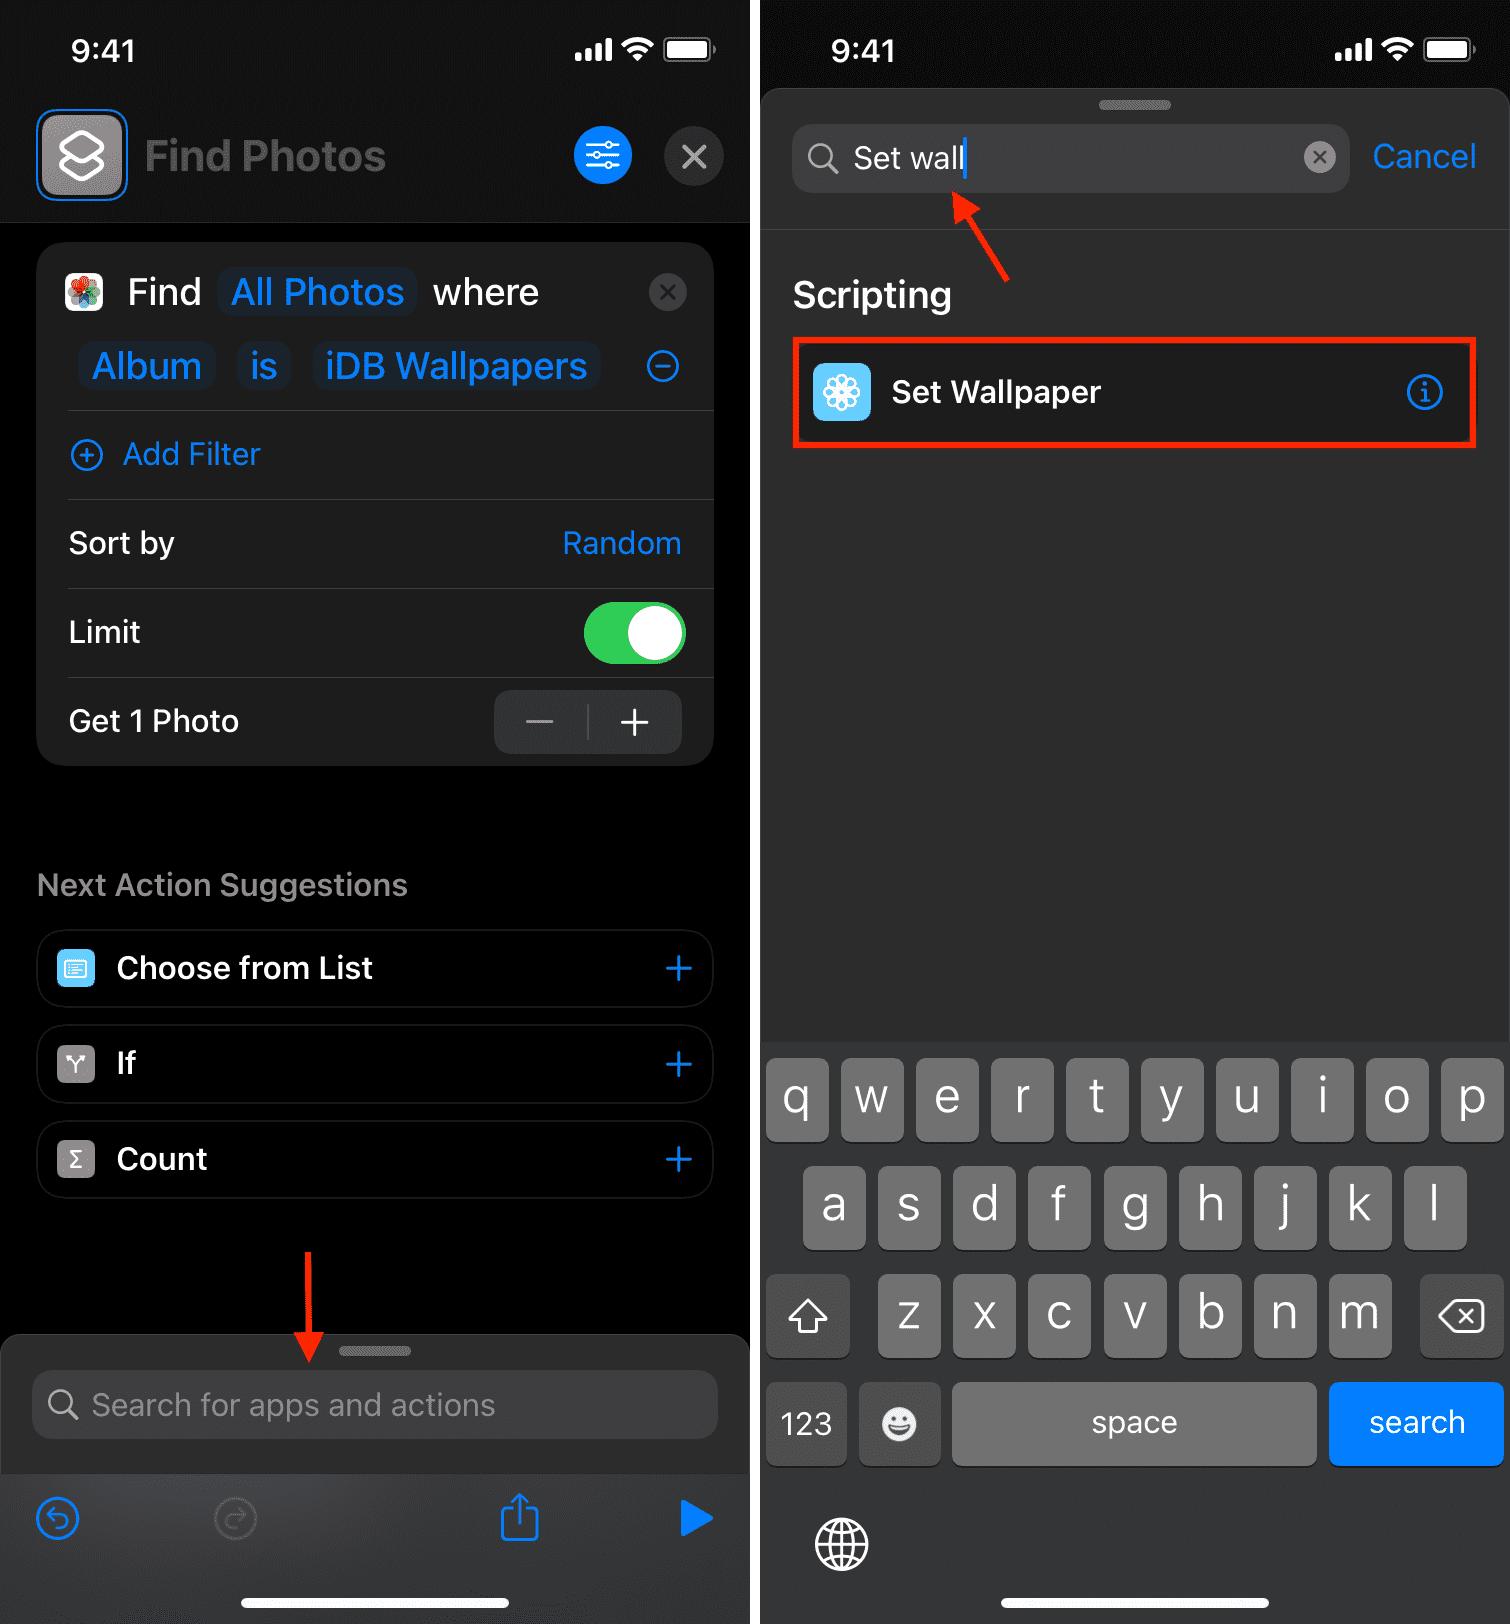 Set Wallpaper action added to your shortcut